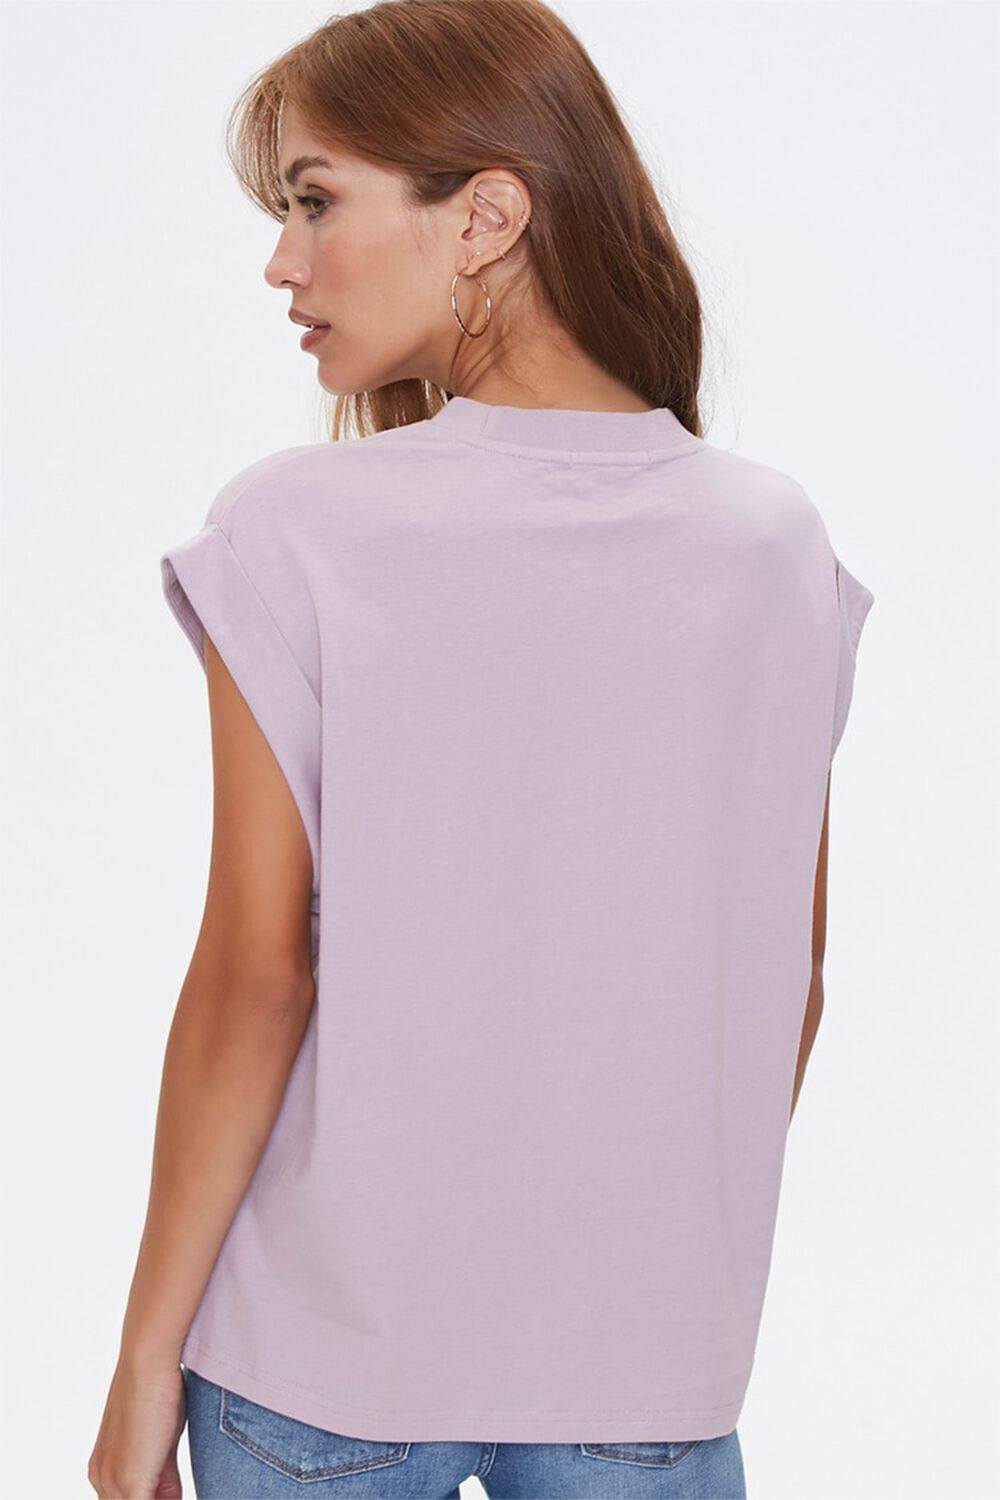 LILAC Cotton Muscle Tee, image 3